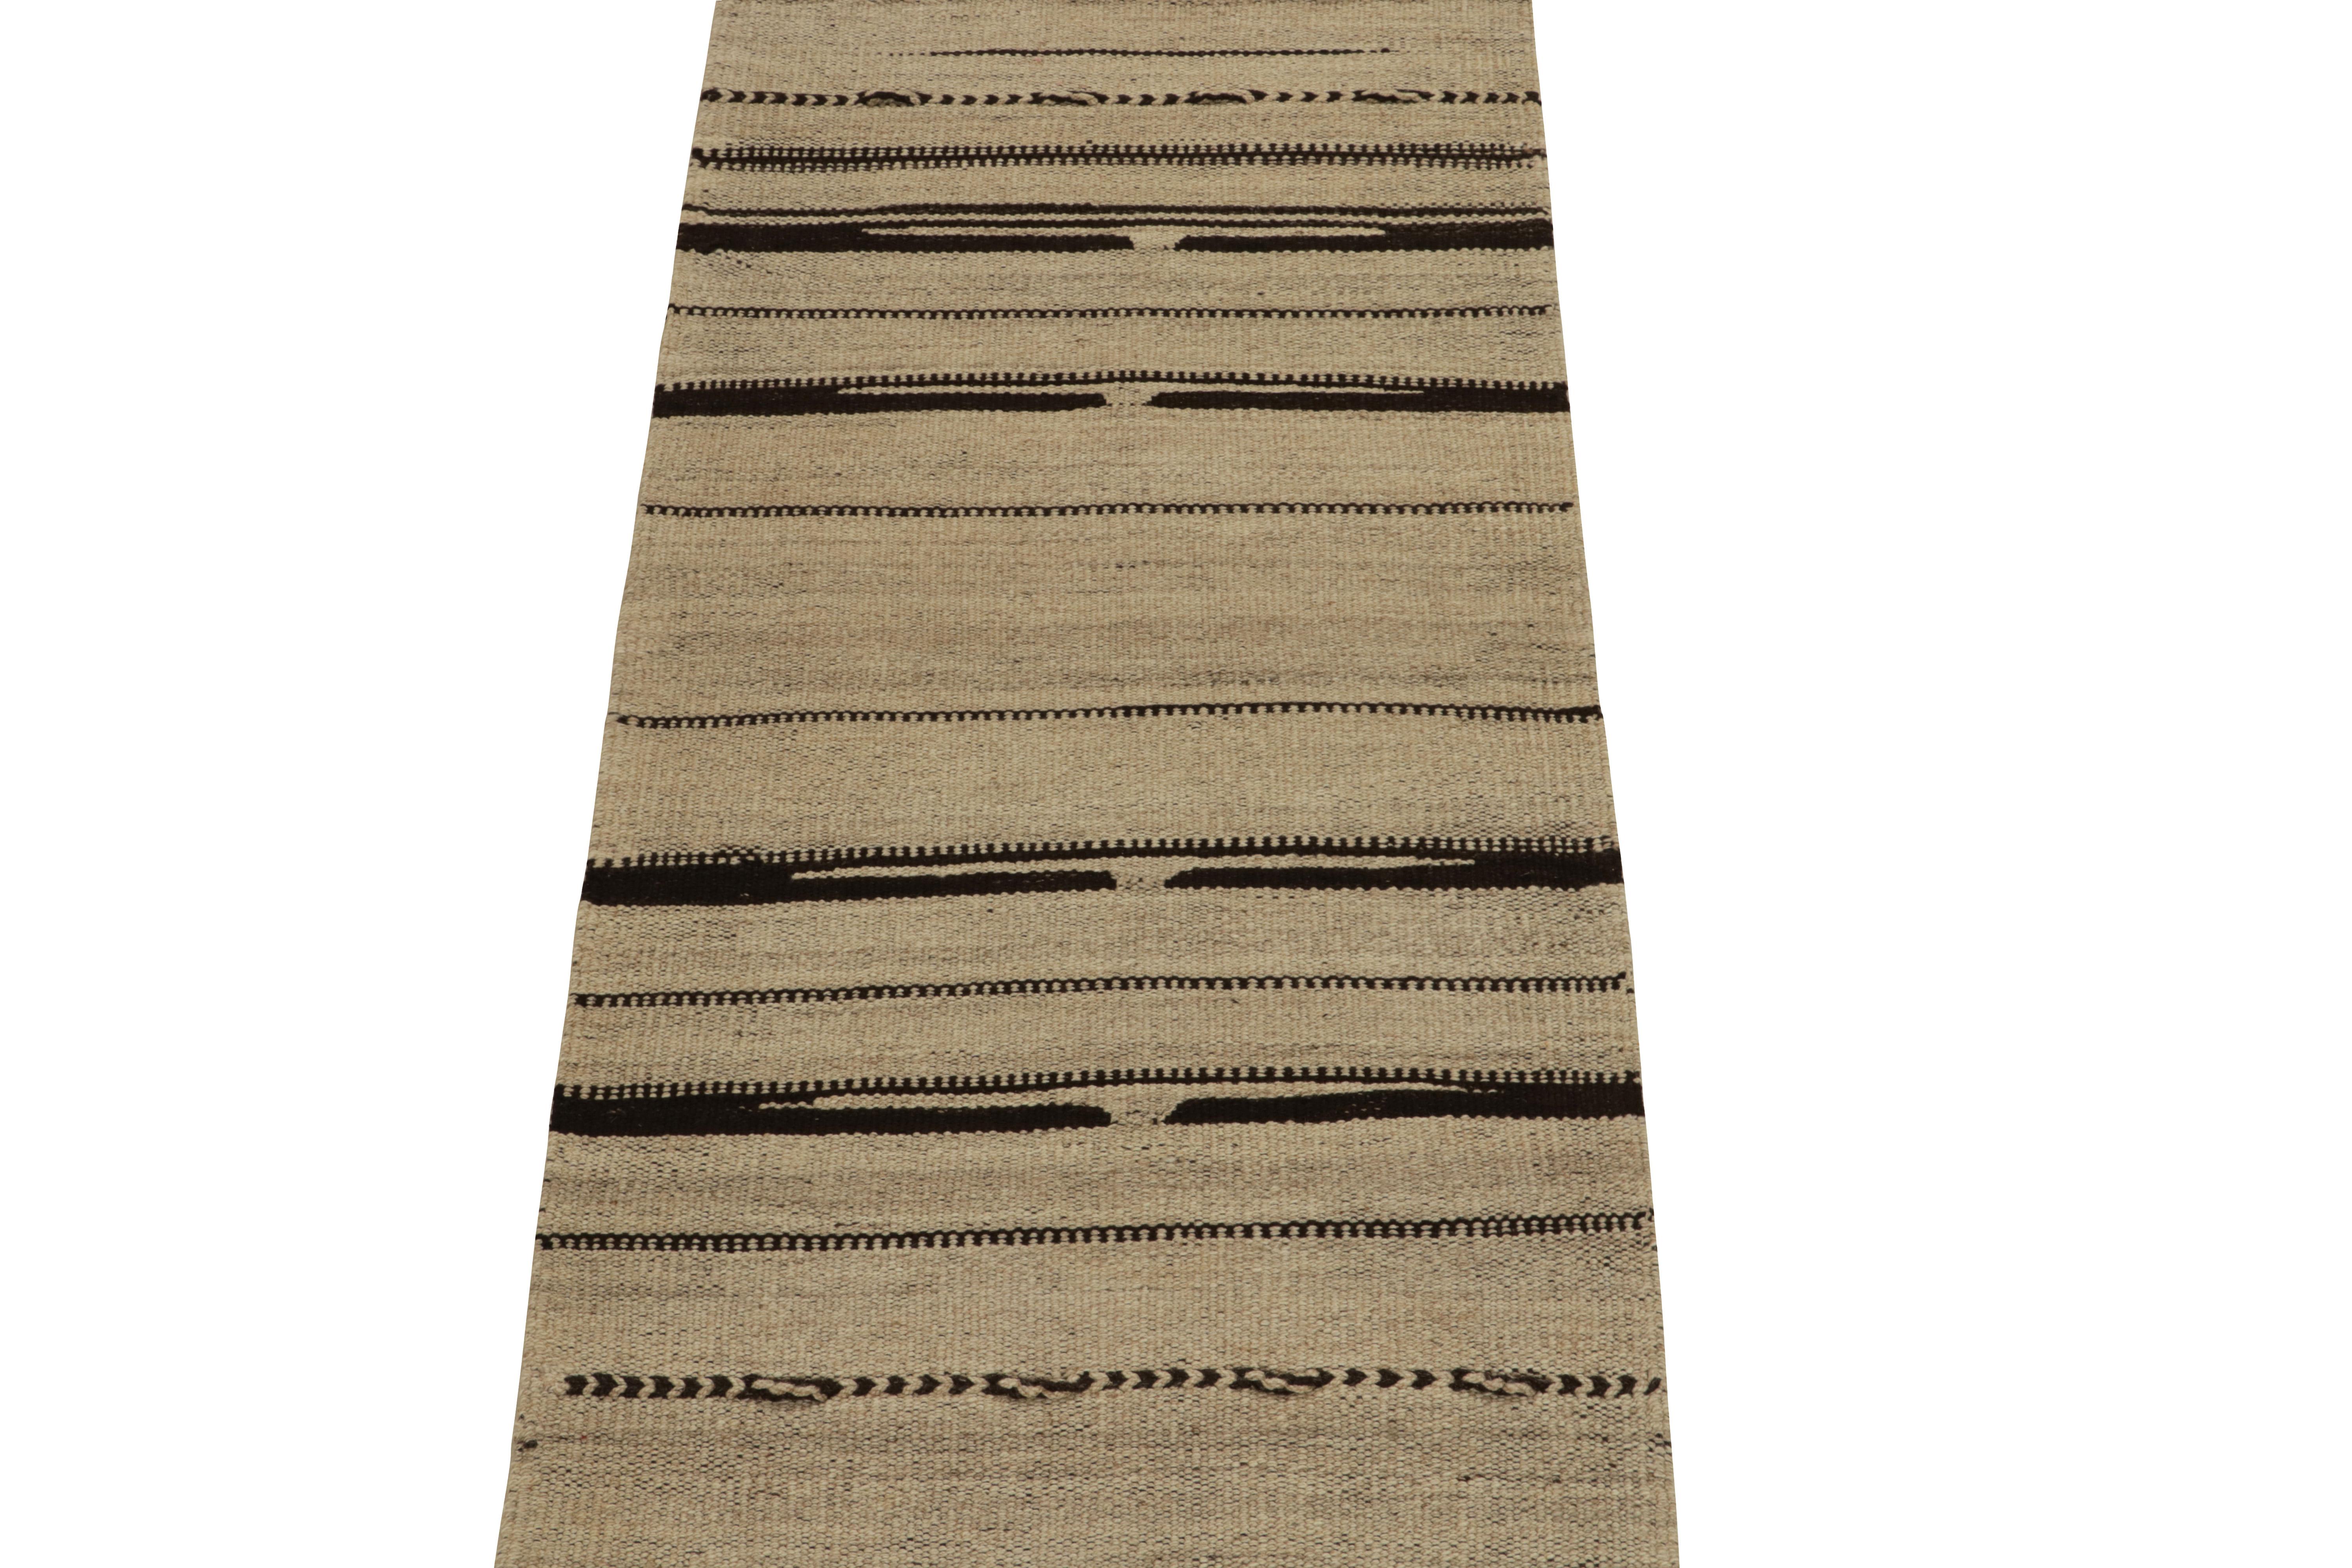 Originating from Turkey circa 1940-1950, from a rare mid-century curation of small-sized Kilims our principal has acquired lately. Adapted from handwoven wool bags into a flatweave, the piece carries a forgiving attitude and a refreshing take on